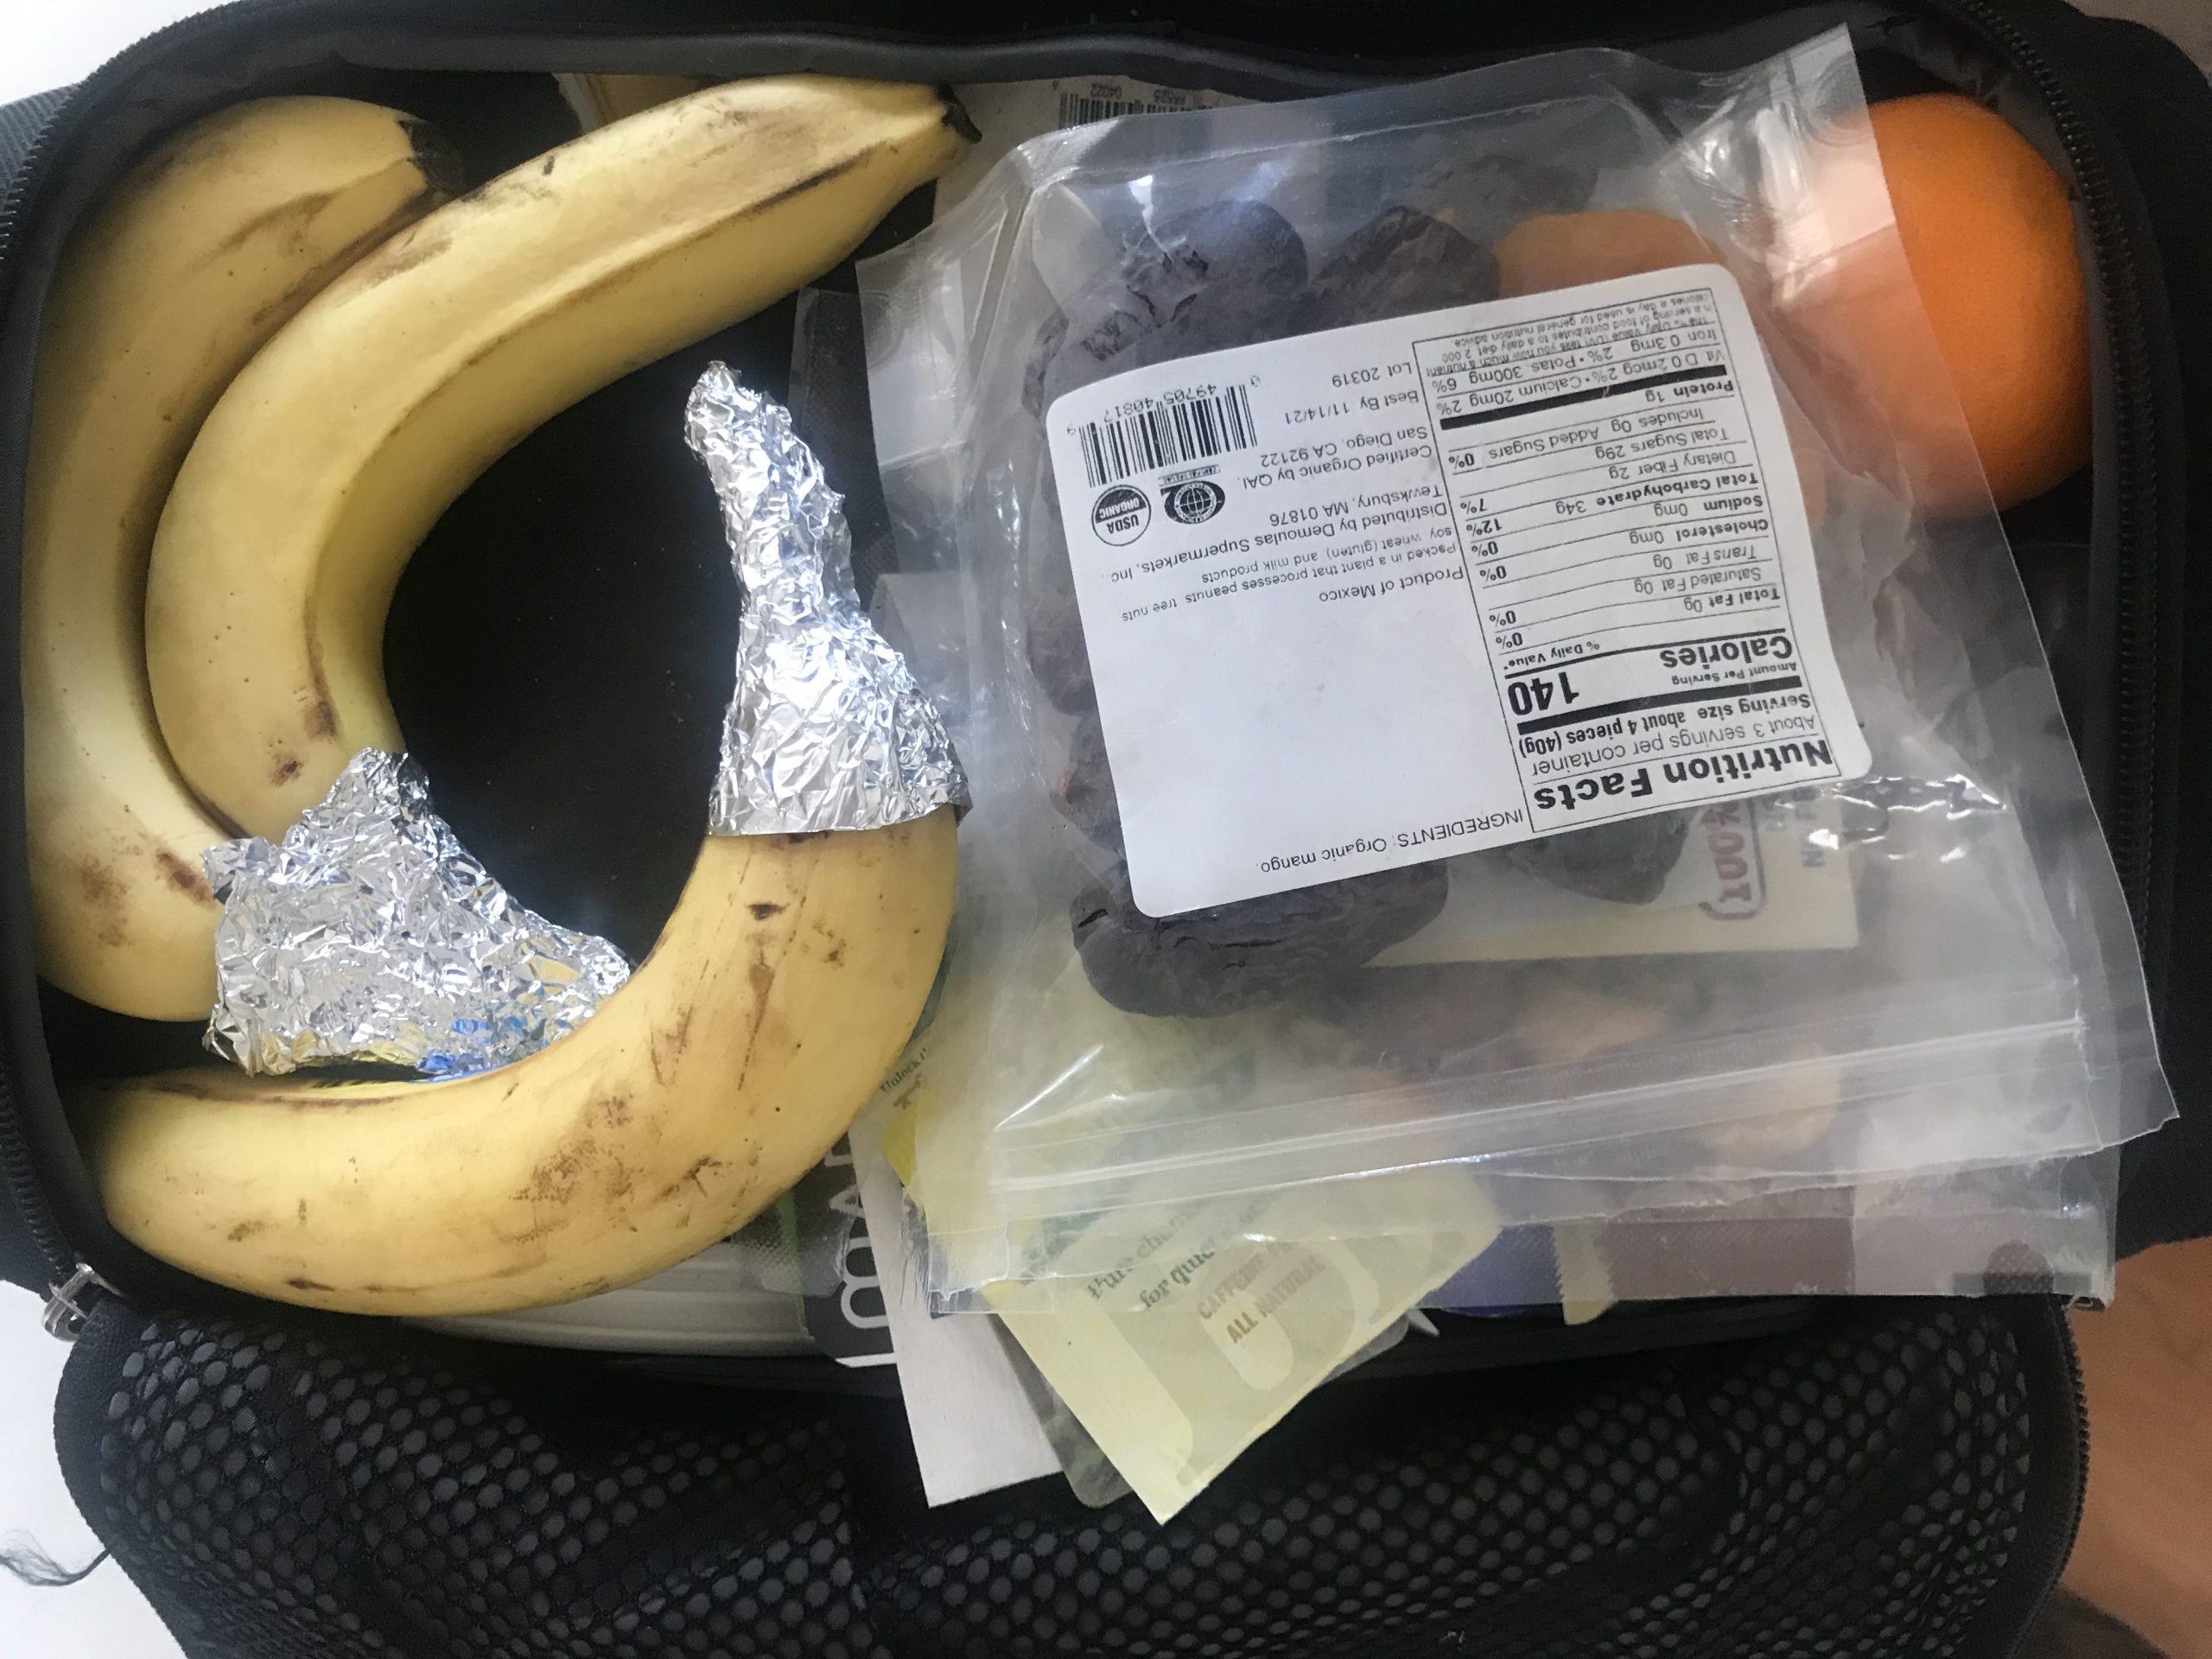 lunchbox, whats in your lunchbox?, bananas, dates, healthy eating, eating healthy on the go, things to eat while traveling, staying healthy while traveling, traveling with dietary restrictions, what flight attendants eat, what's ina flight attendant's lunchbox?, fruit, tea